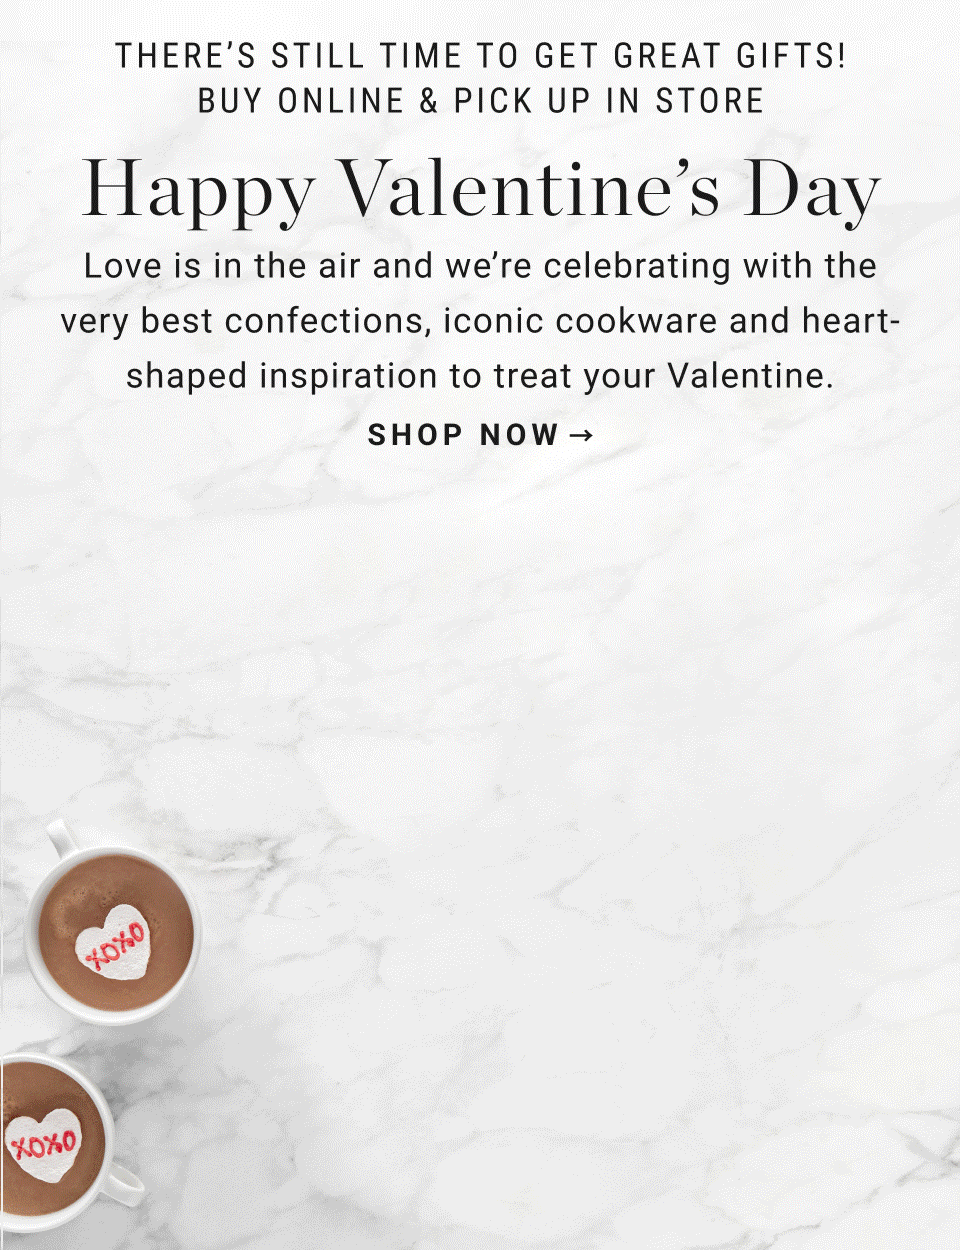 14 Virtual Gift Ideas for Valentine's Day | Dans le Lakehouse